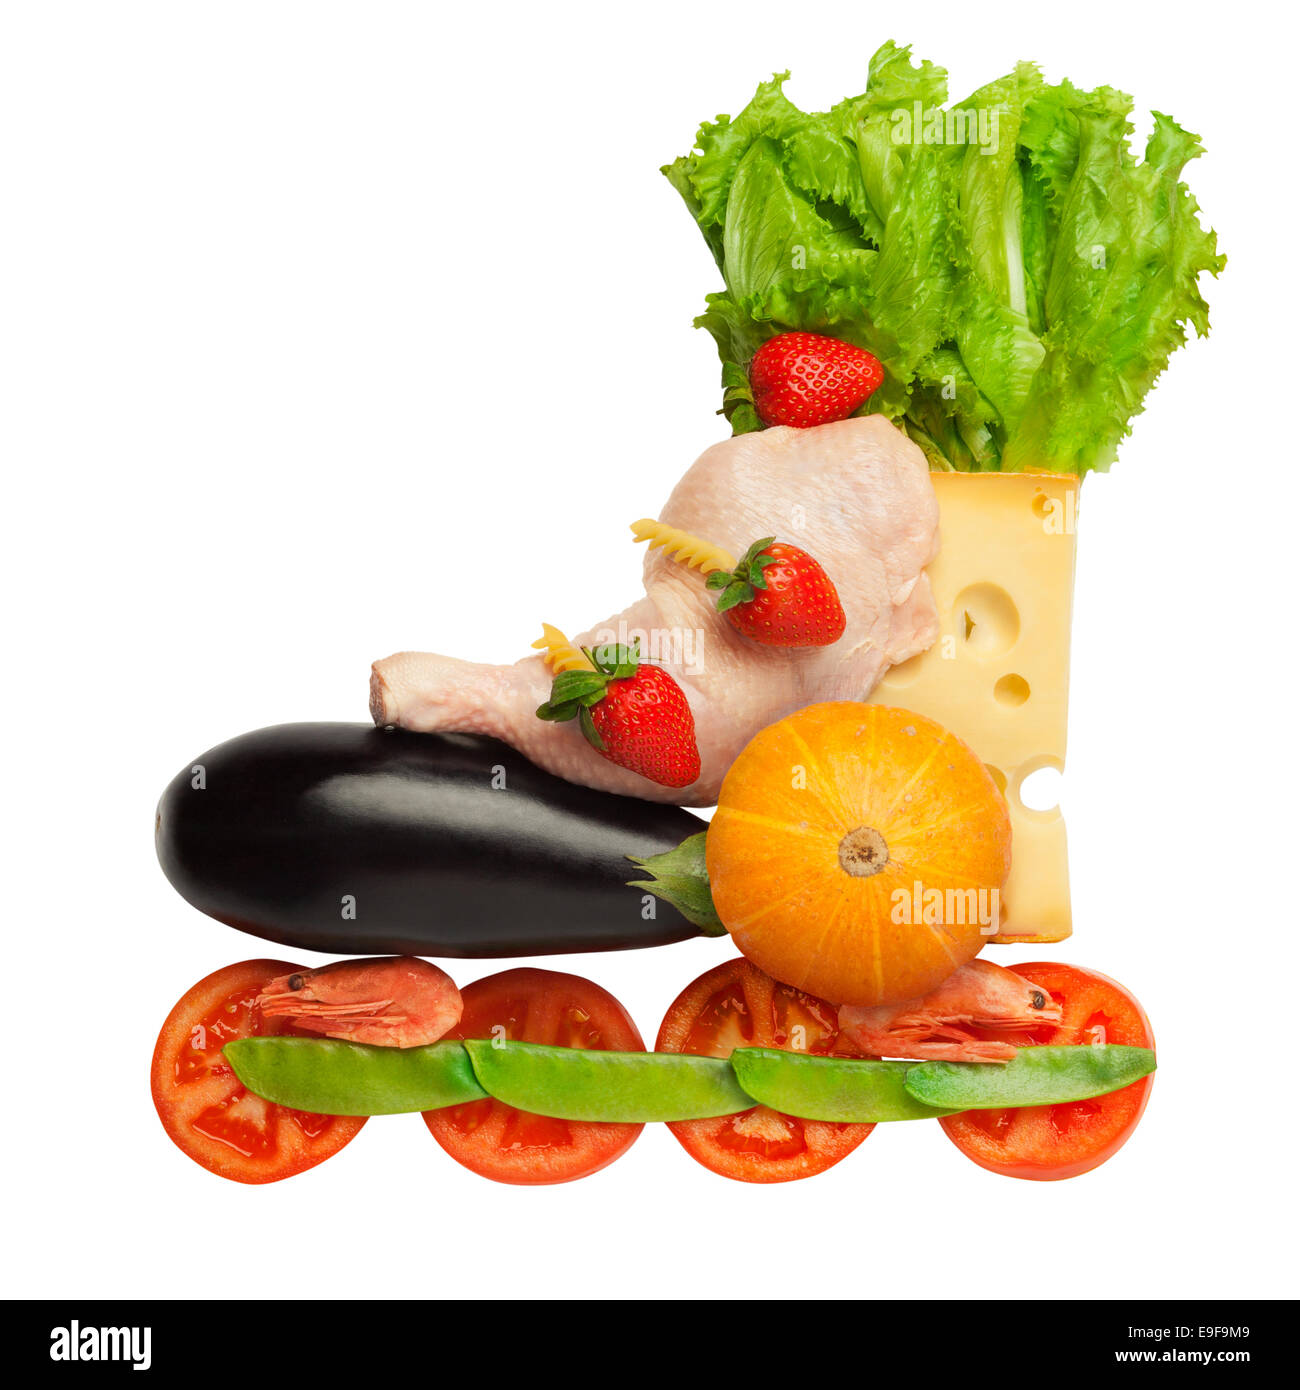 Healthy food in a healthy body: fitness as a life-style. Stock Photo